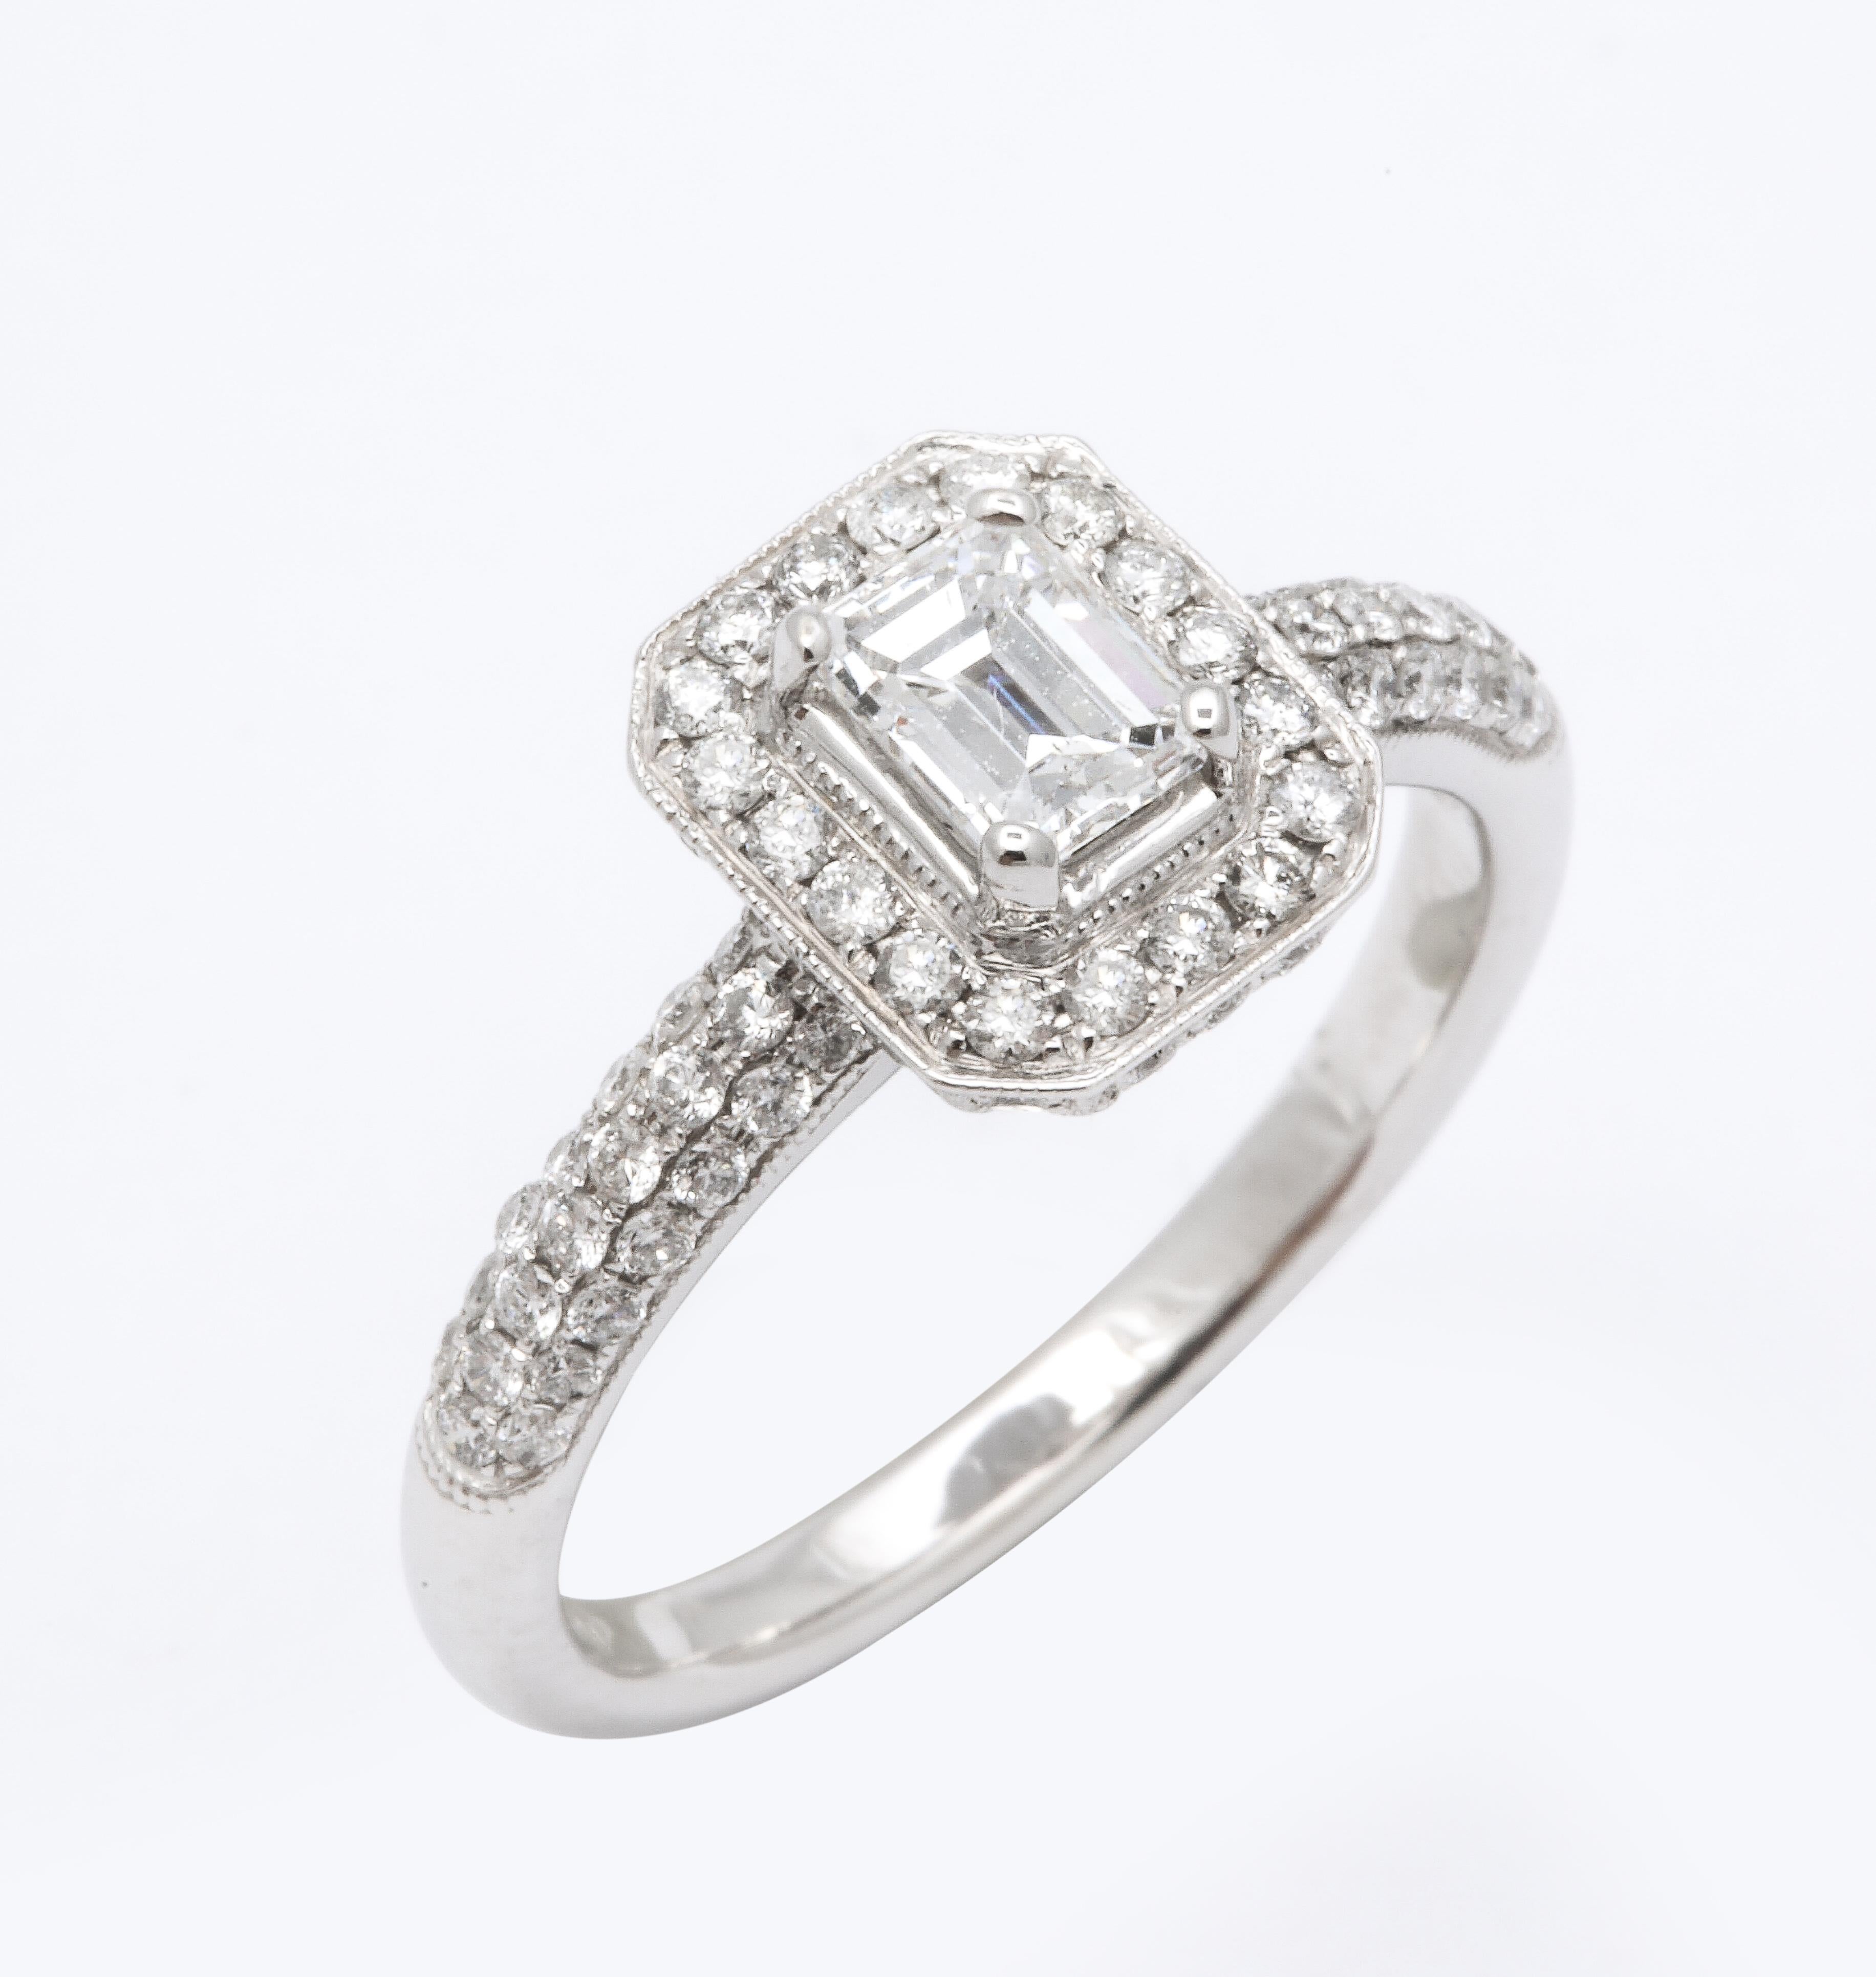 Emerald Cut Diamond and 18k White Gold Engagement Ring In Good Condition For Sale In New York, NY